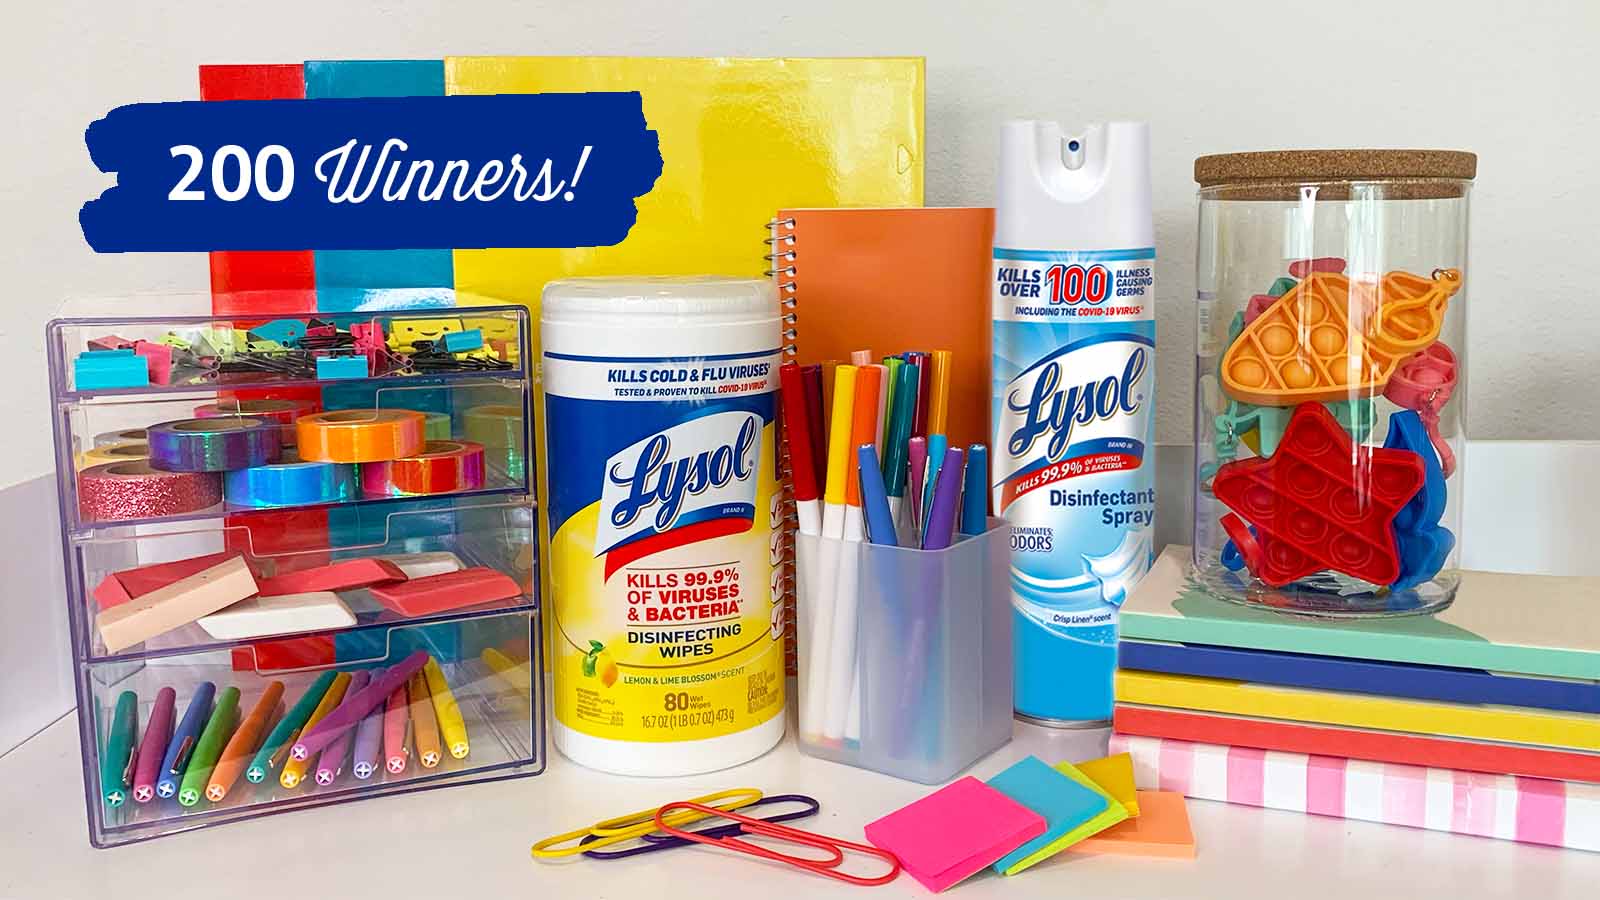 Lysol disinfecting wipes and spray and other supplies with text '200 Winners!'